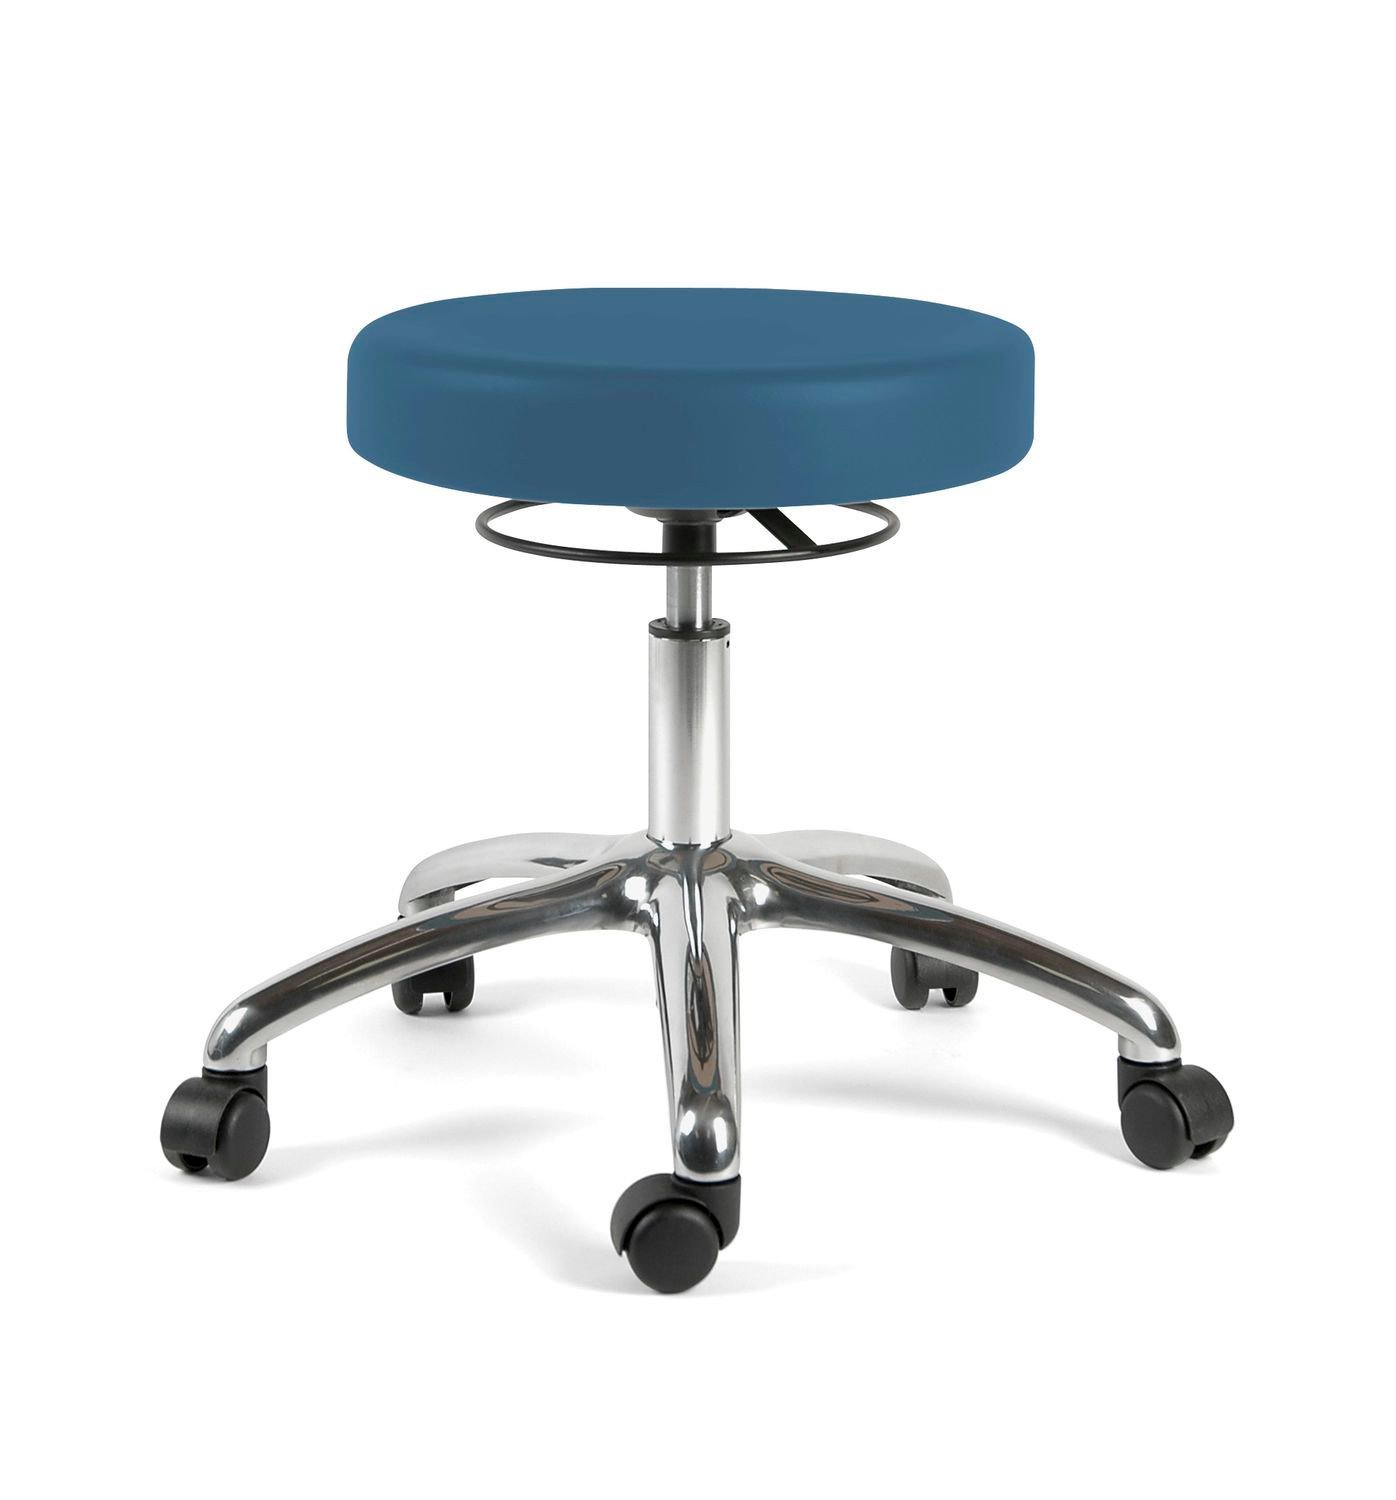 Medical stool / on casters / height-adjustable Stance Healthcare